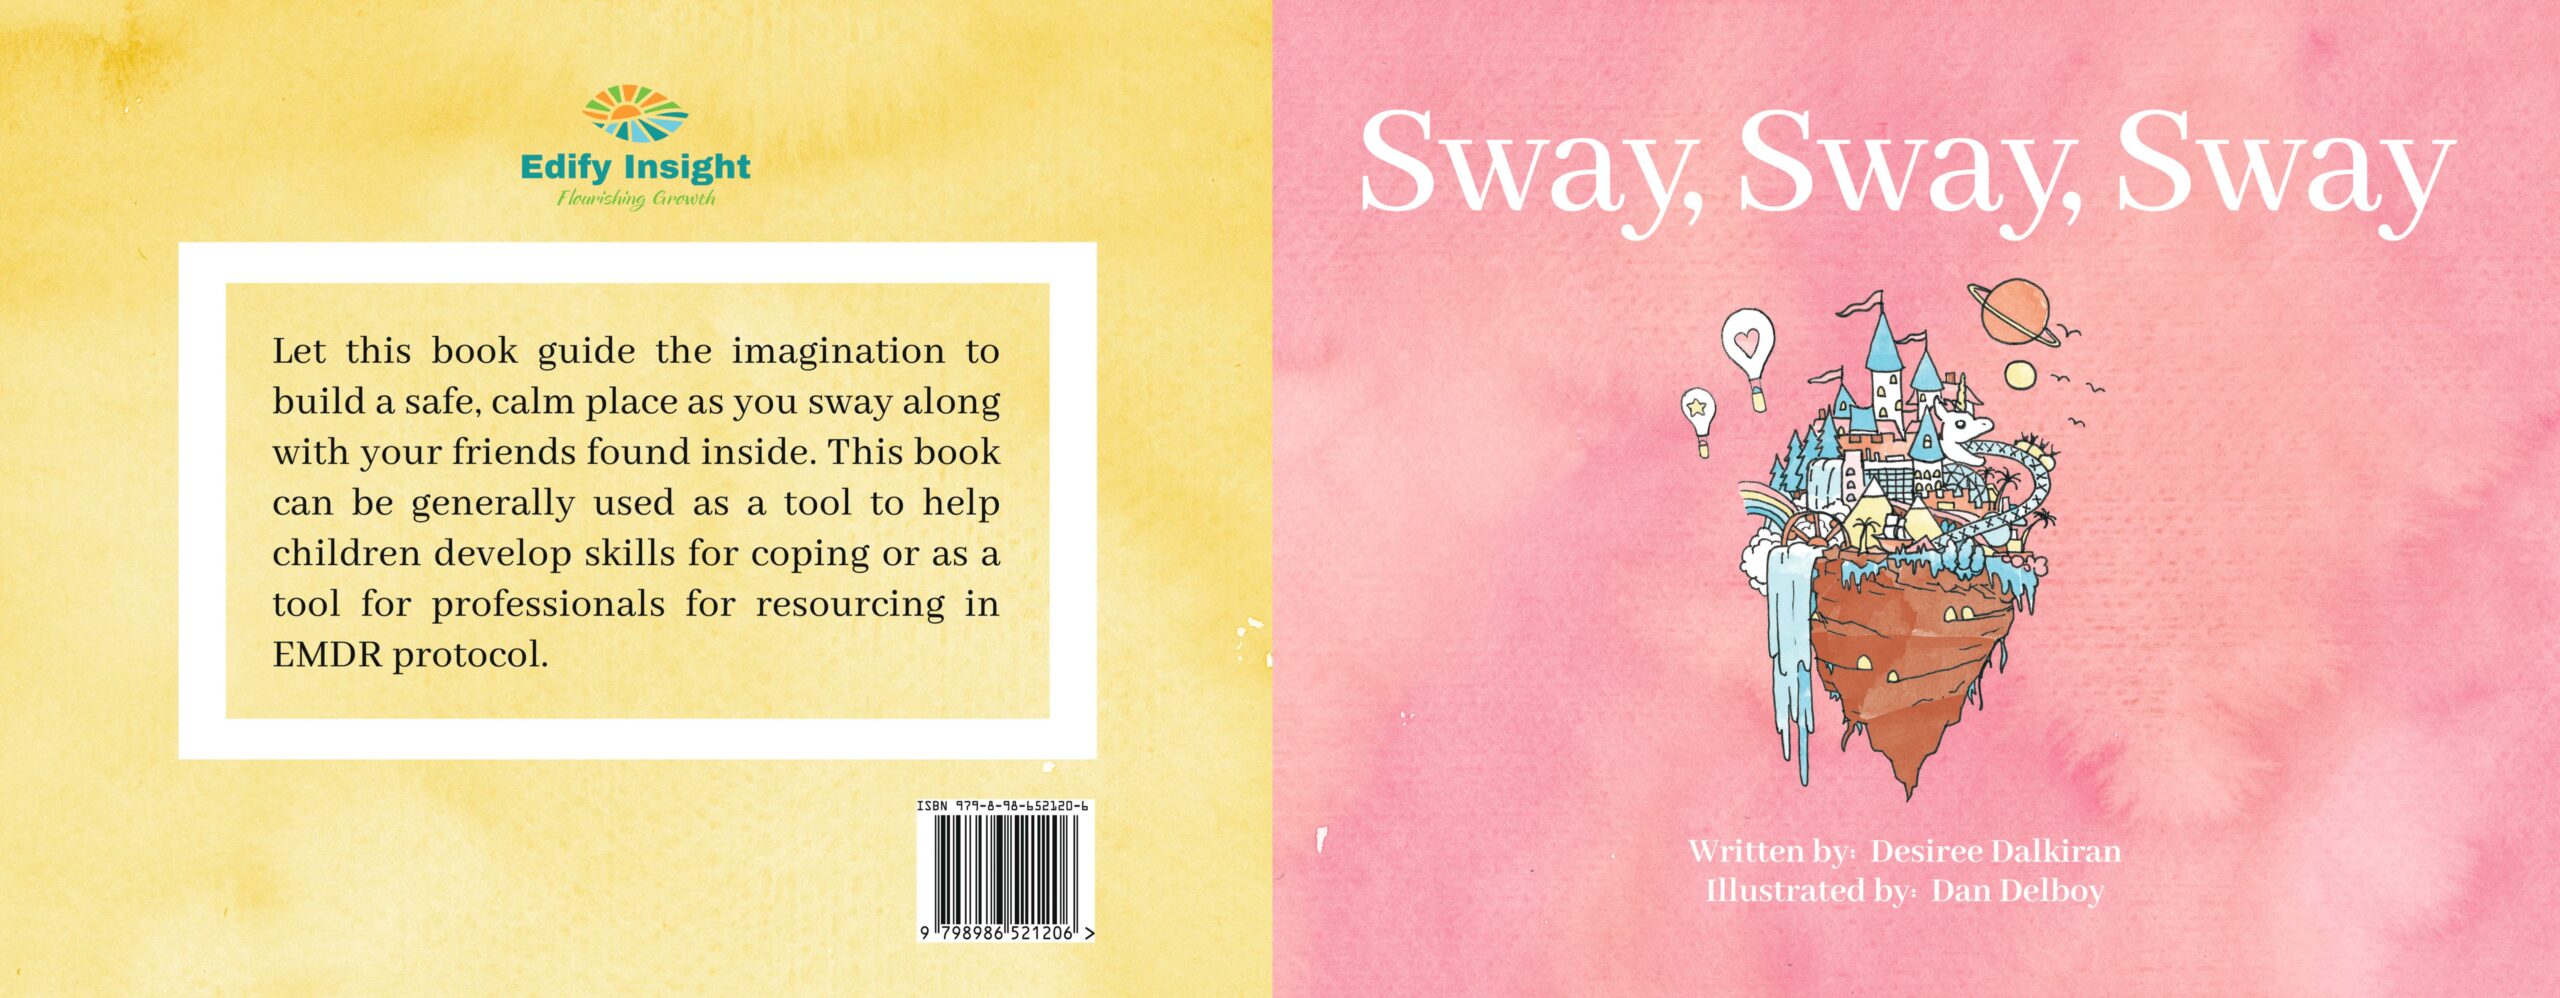 An image of the front and backpage of the EMDR Book with the tile Sway, Sway, Sway